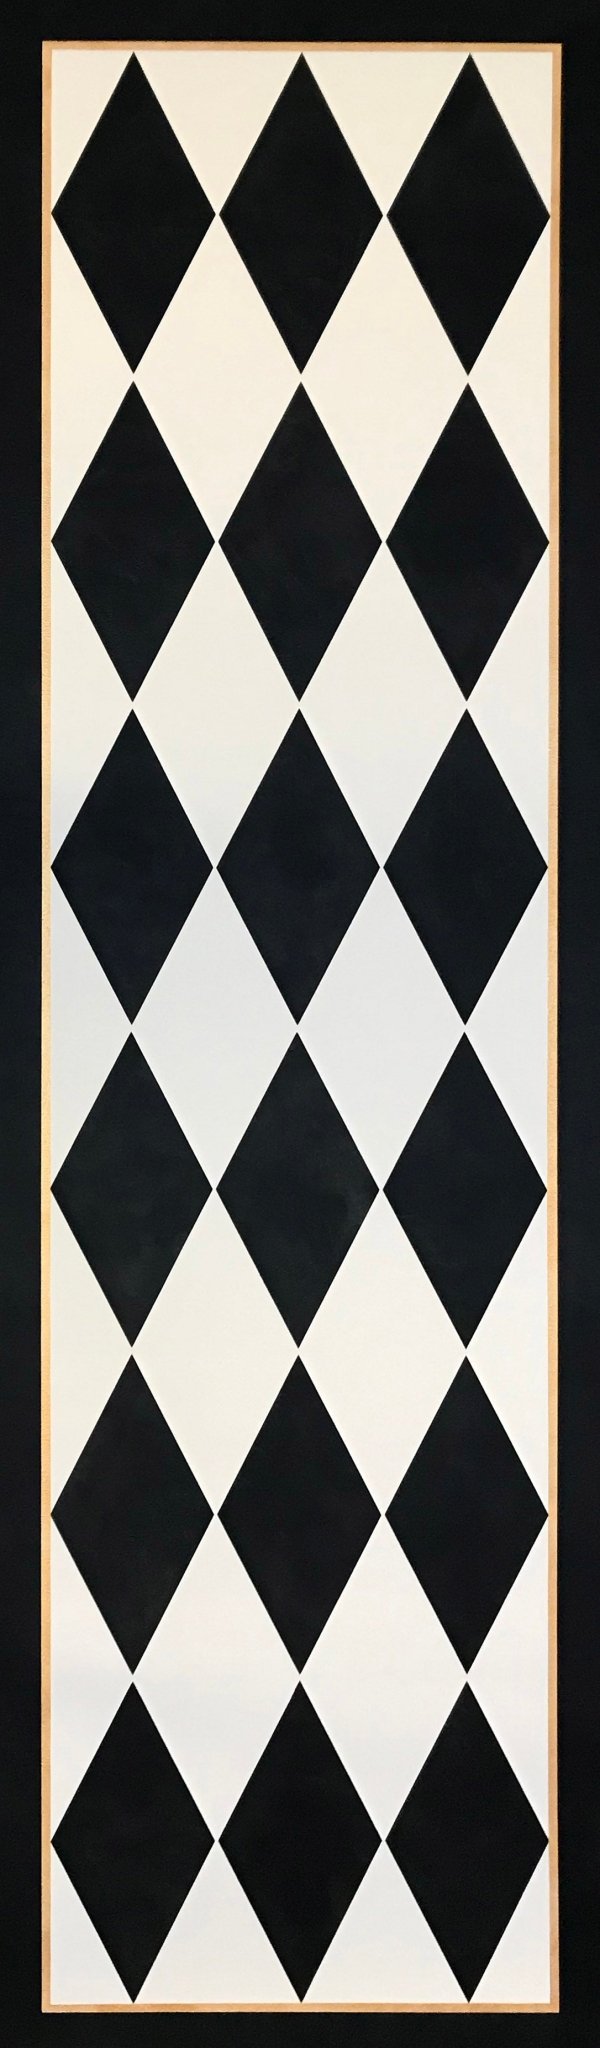 The full image of this traditional floorcloth which employs a classic harlequin pattern of elongated diamonds in cream and black. 